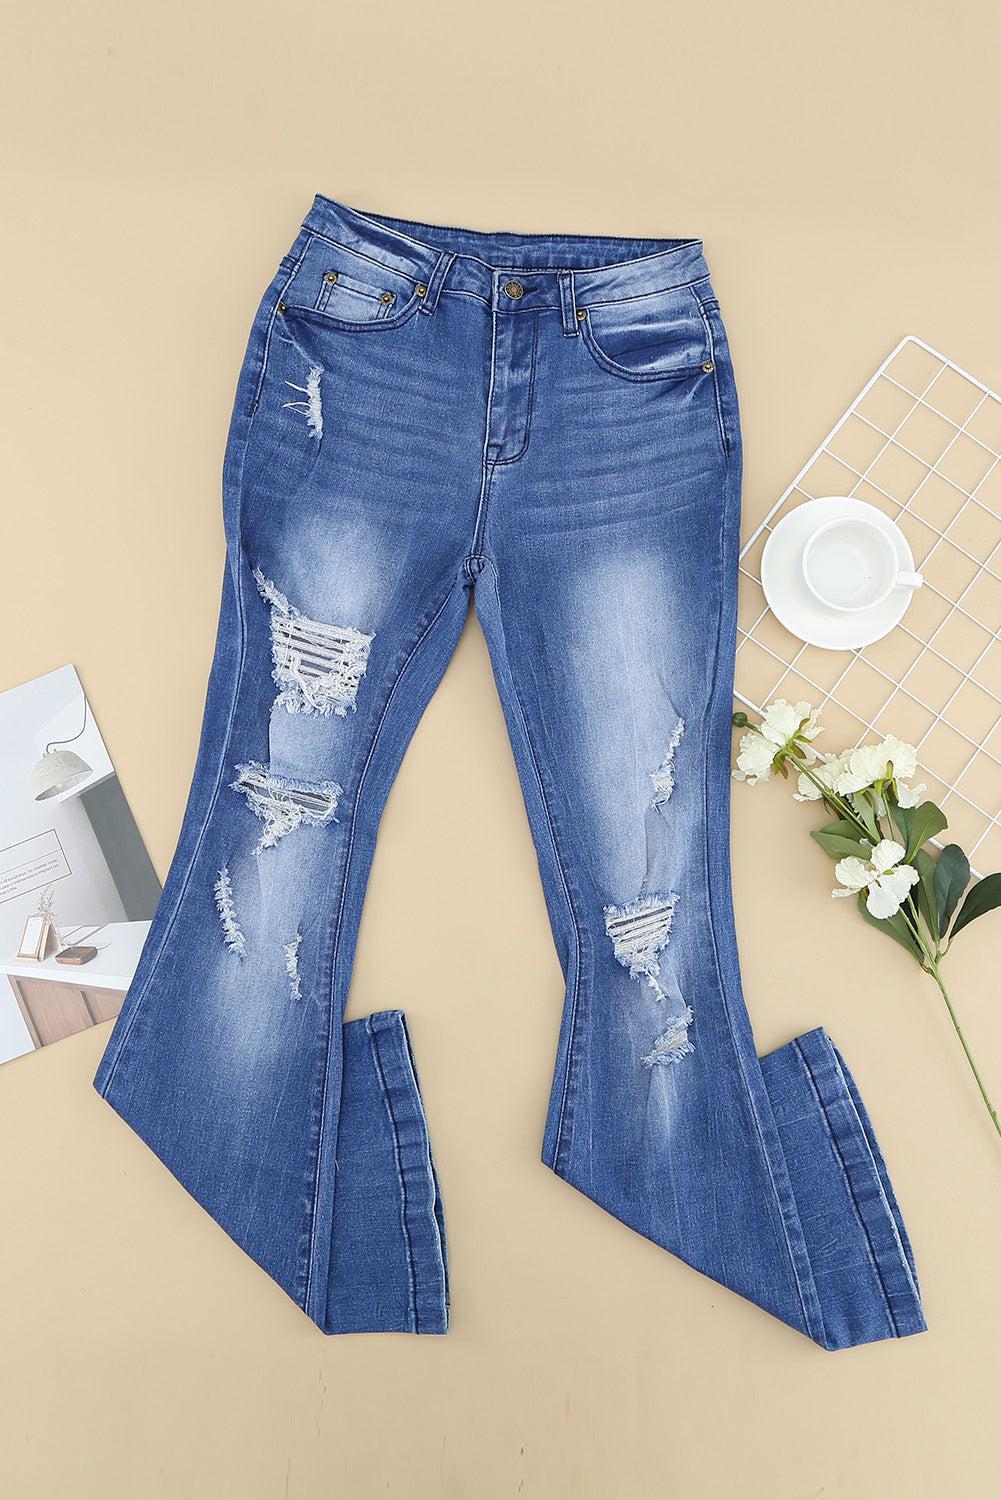 Distressed Flare Leg Jeans with Pockets-BOTTOM SIZES SMALL MEDIUM LARGE-[Adult]-[Female]-Blue Zone Planet